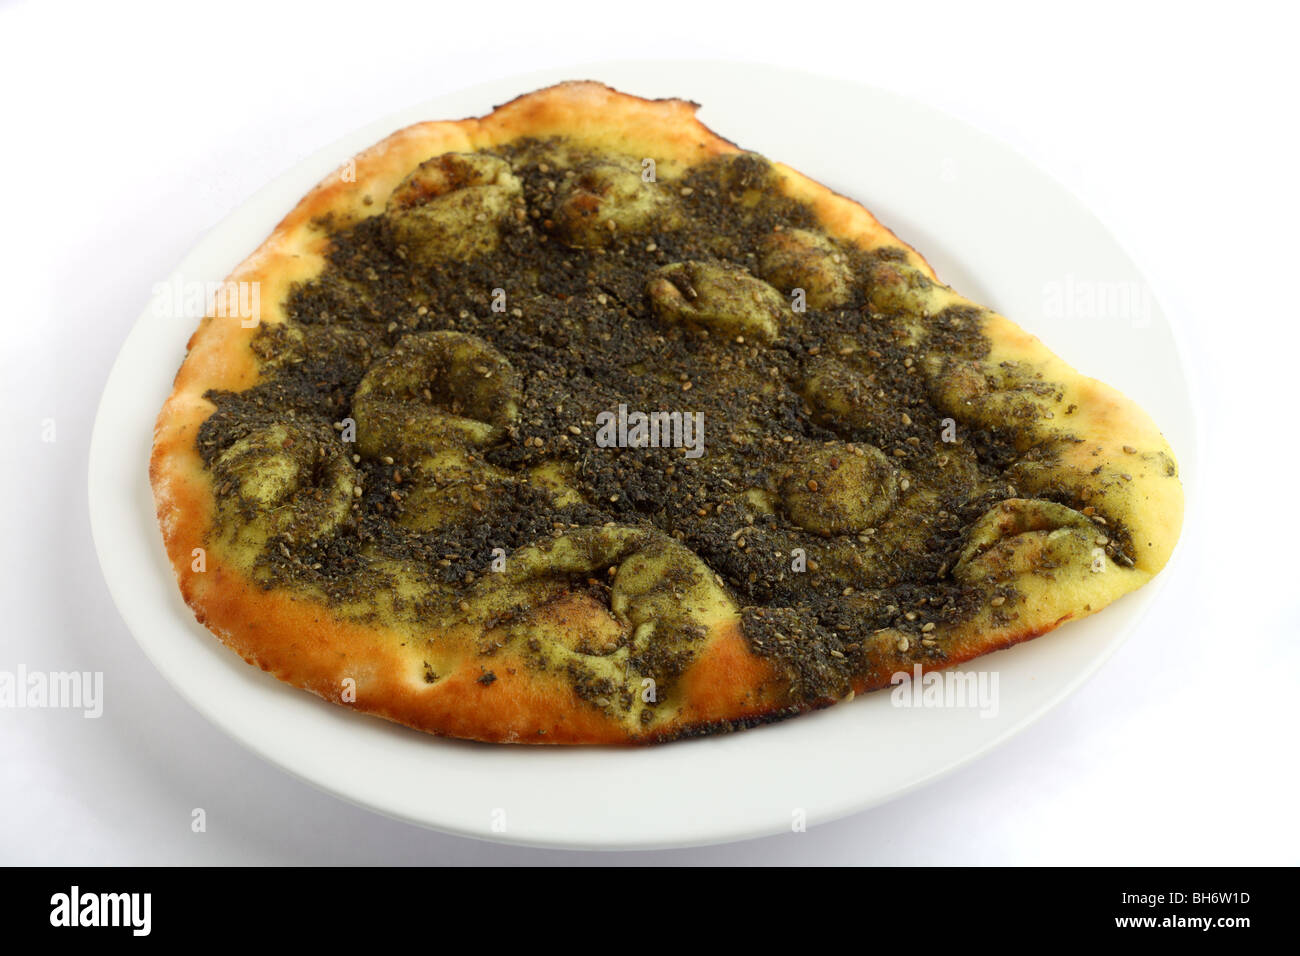 An Arabian manakish bread snack, topped with zattar - a herb mixture based on thyme and sesame seeds. Stock Photo